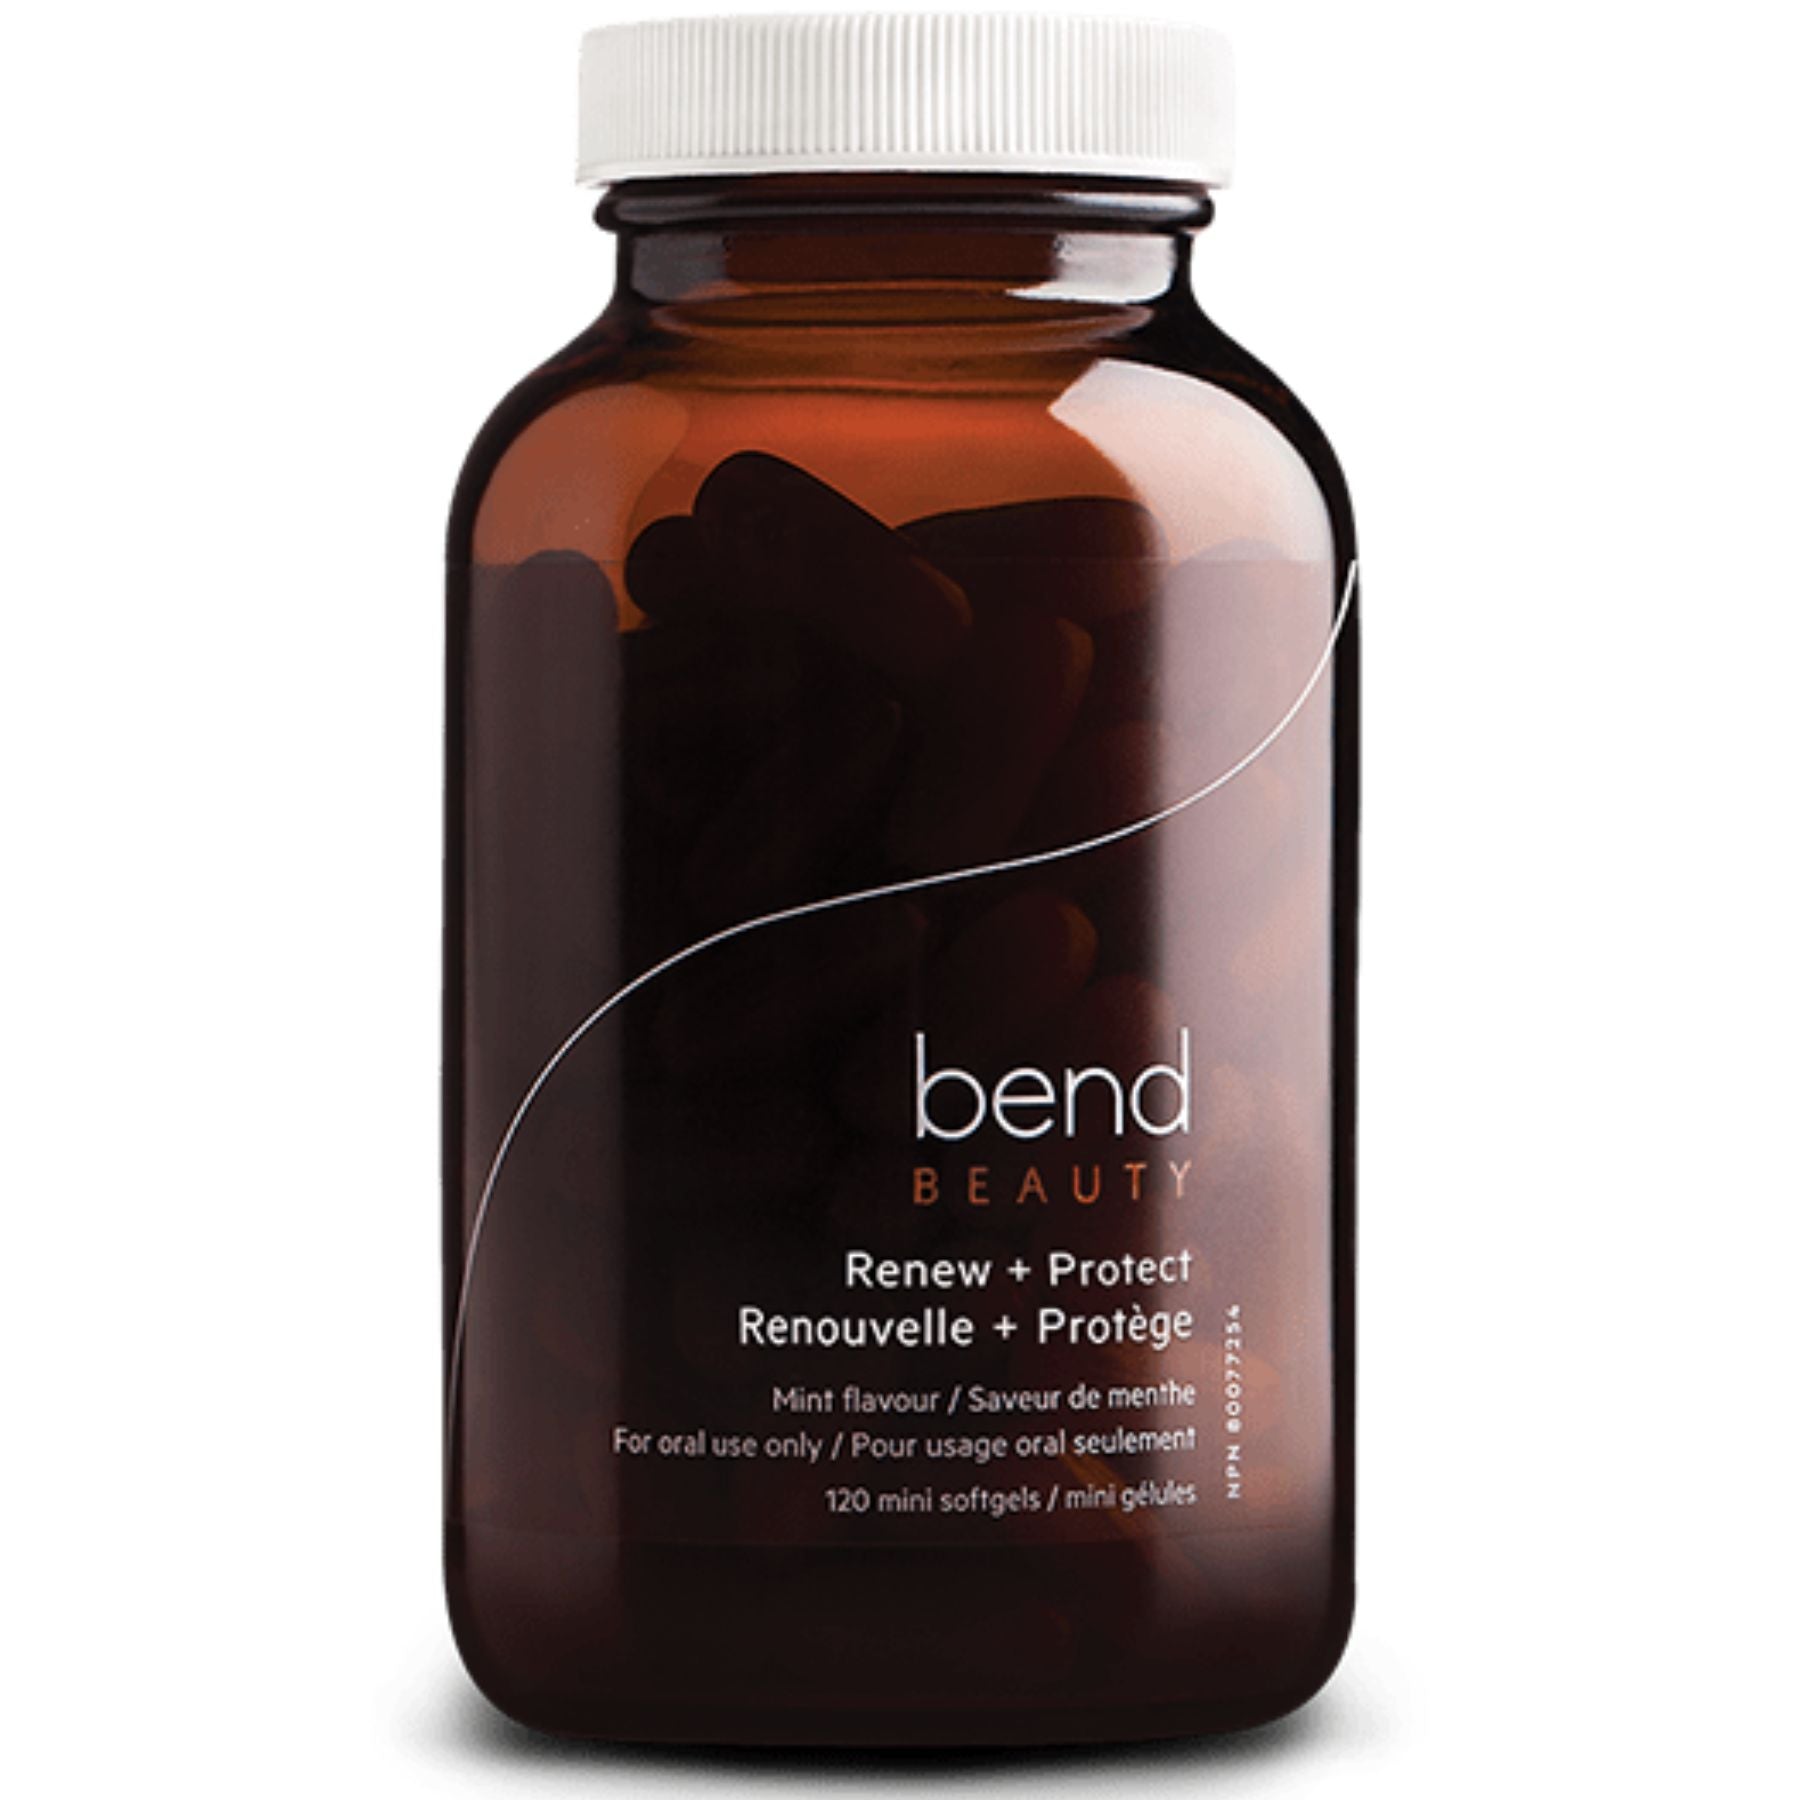 Image of Bend Beauty Renew + Protect. 120 mini softgels in a dark brown glass bottle. A comprehensive skincare supplement, available at Fiddleheads Health and Nutrition.